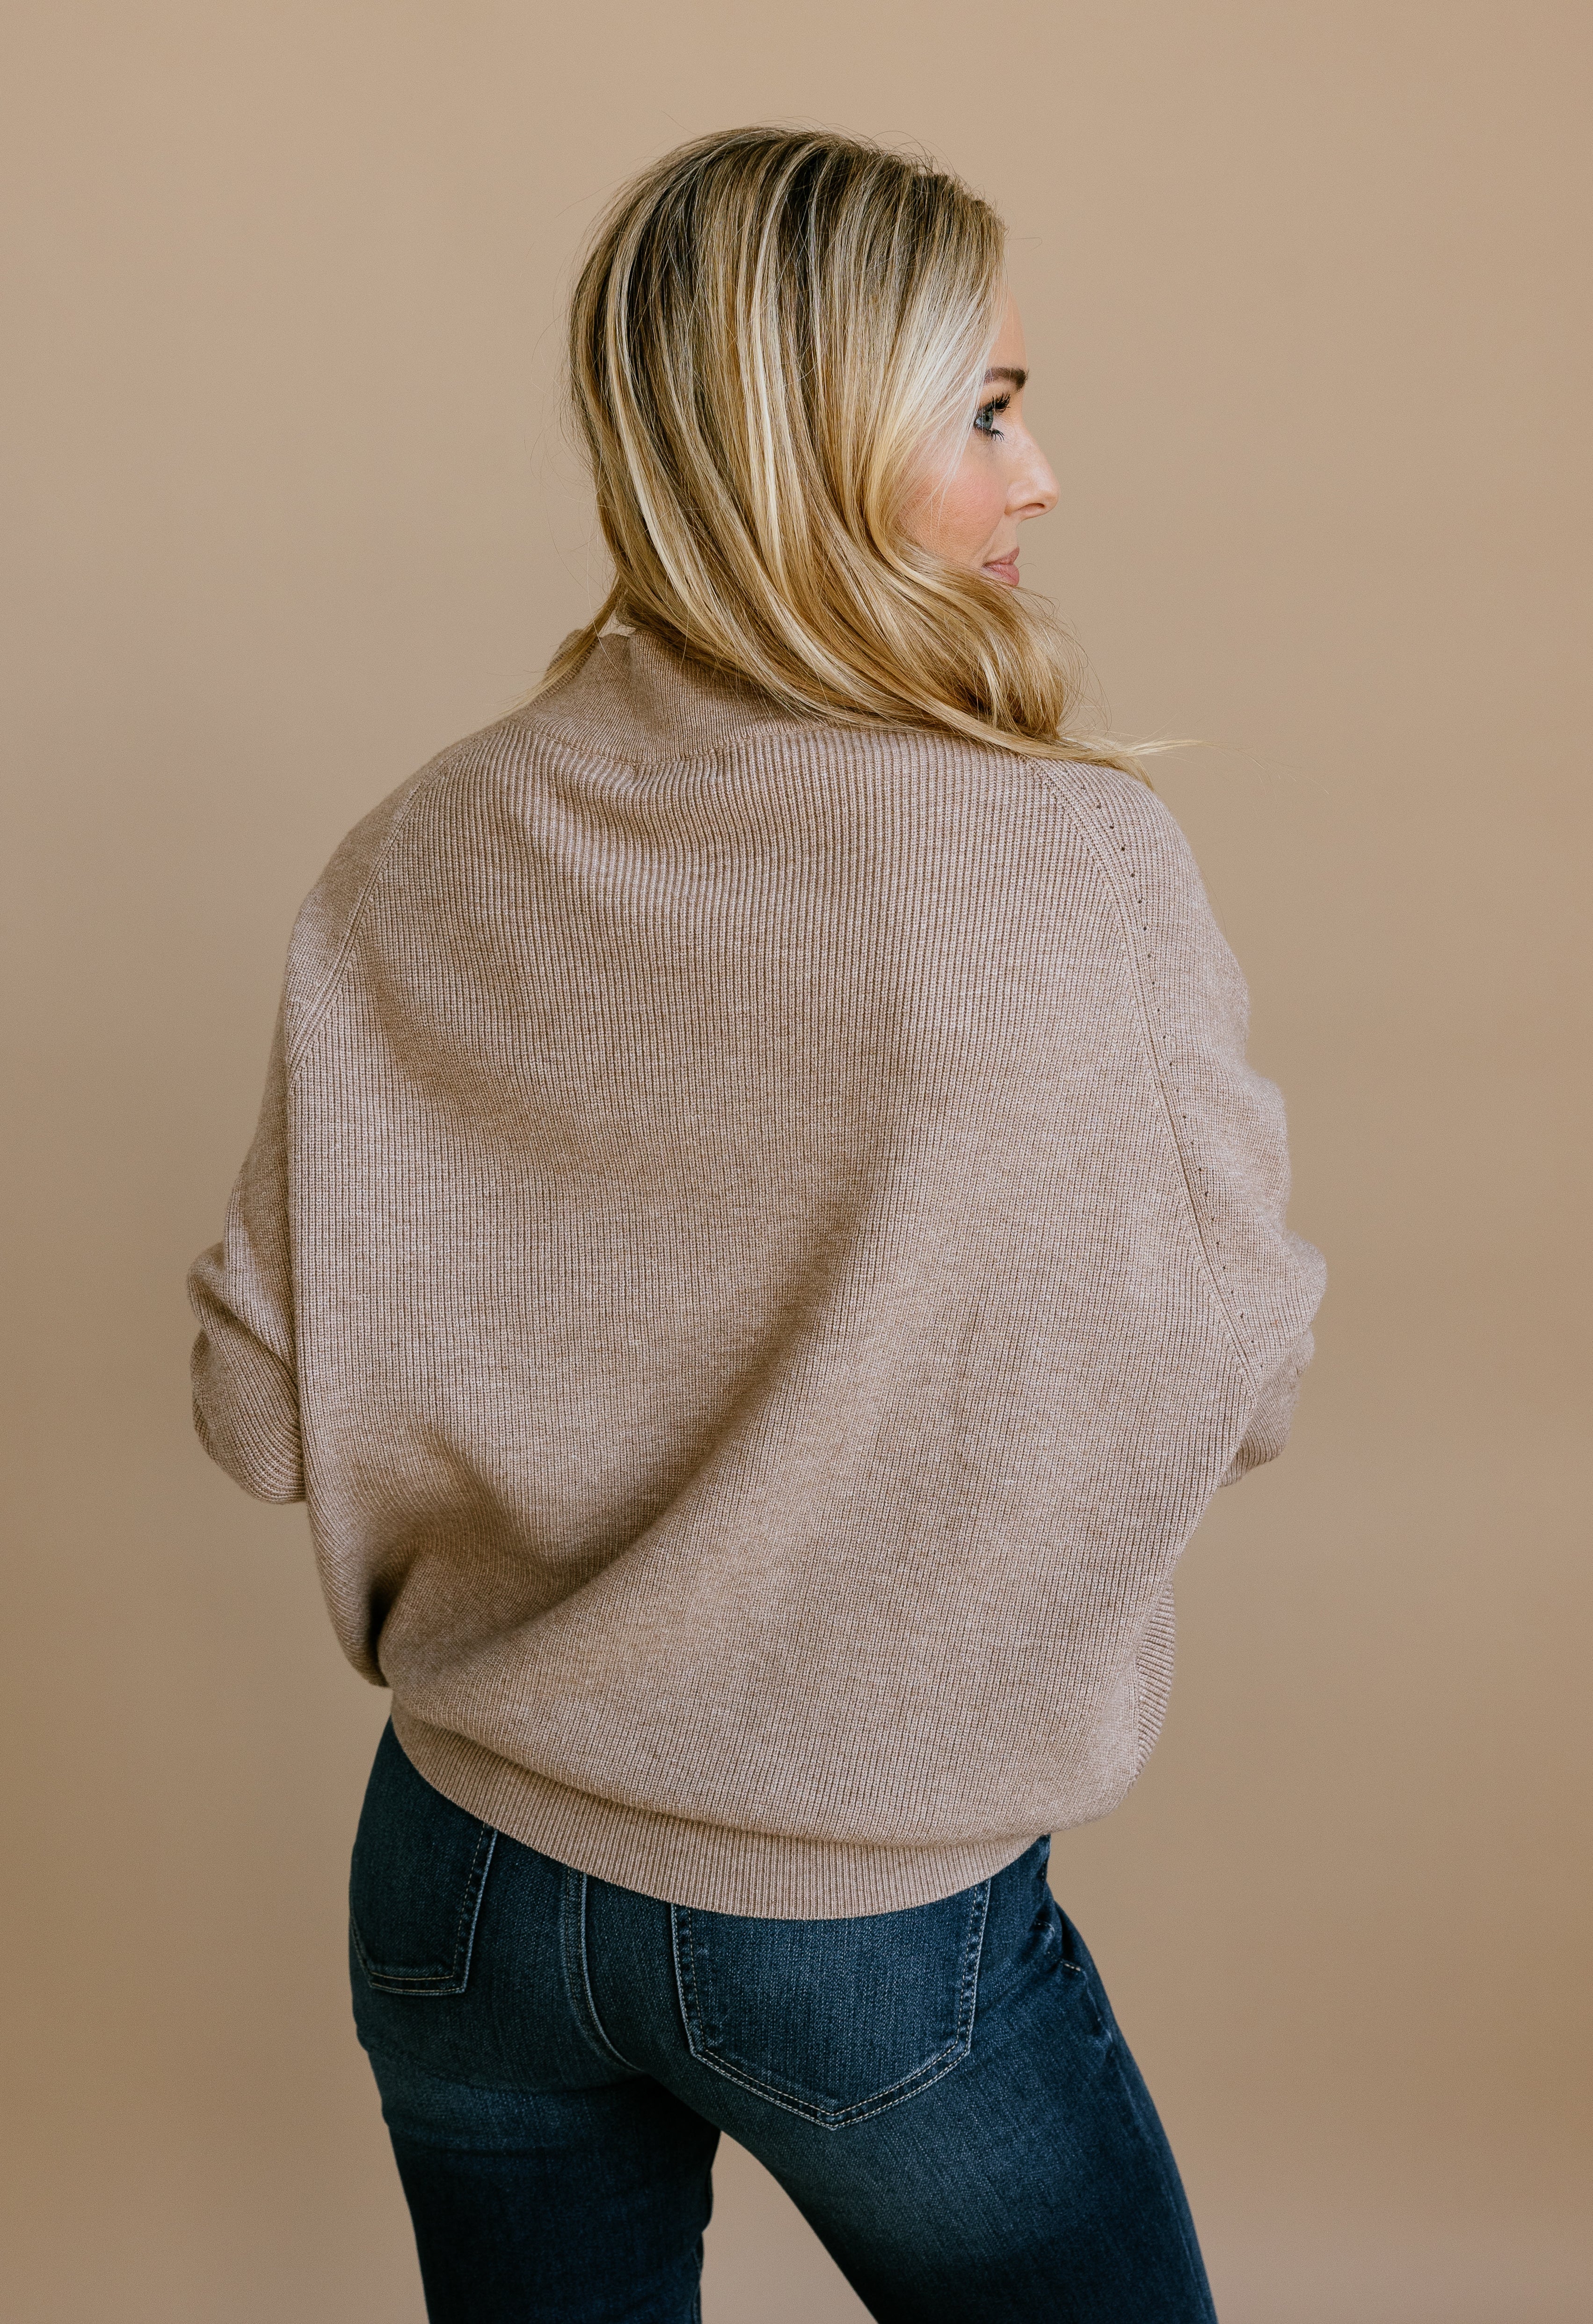 Say Hello Sweater - OATMEAL - willows clothing SWEATER